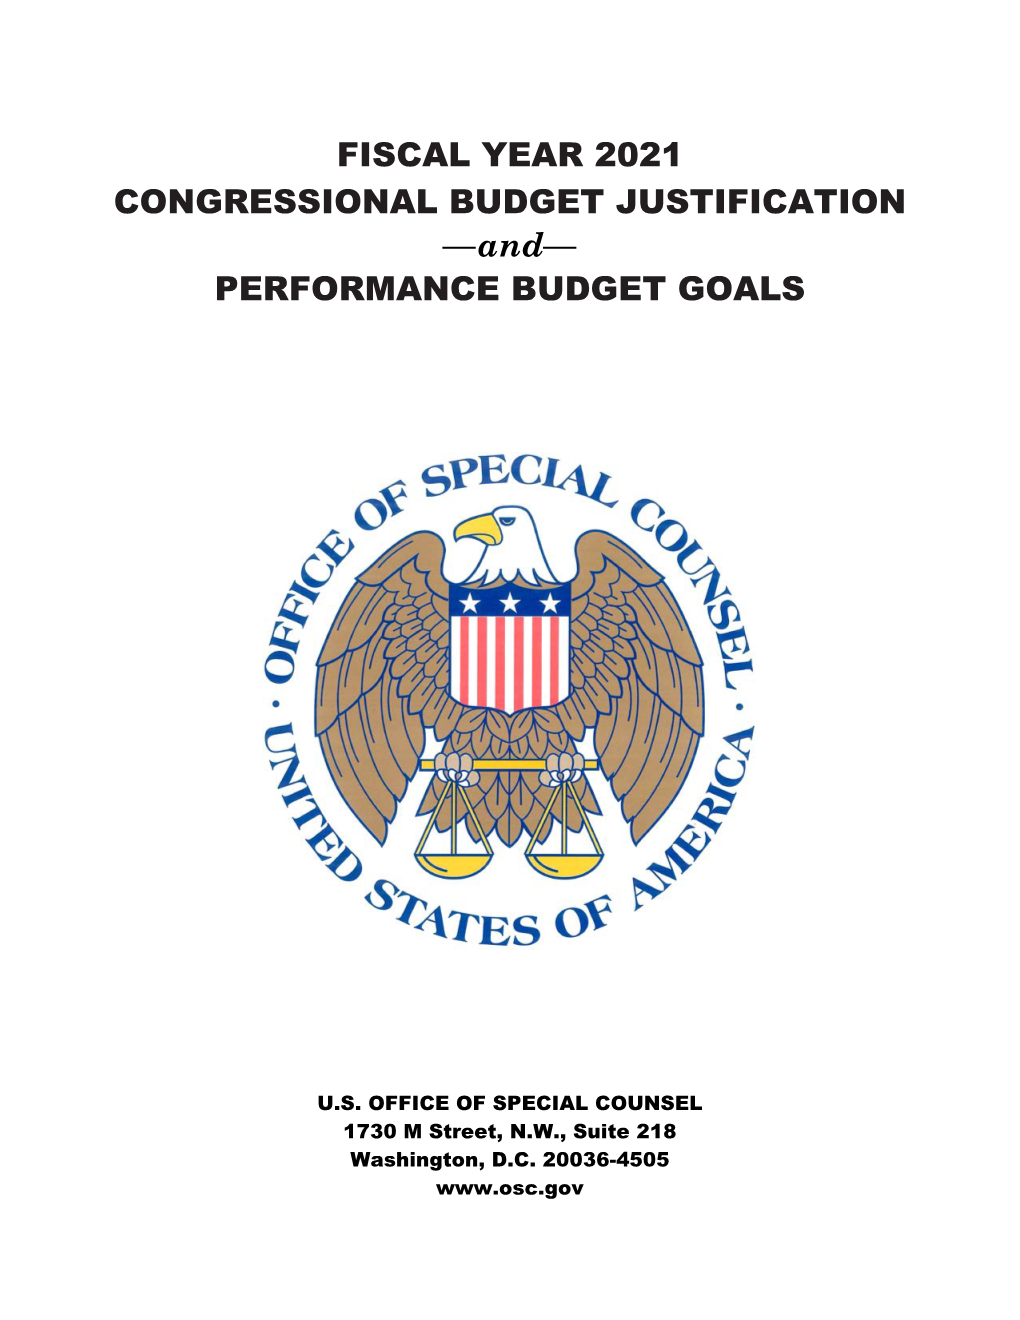 FISCAL YEAR 2021 CONGRESSIONAL BUDGET JUSTIFICATION —And— PERFORMANCE BUDGET GOALS